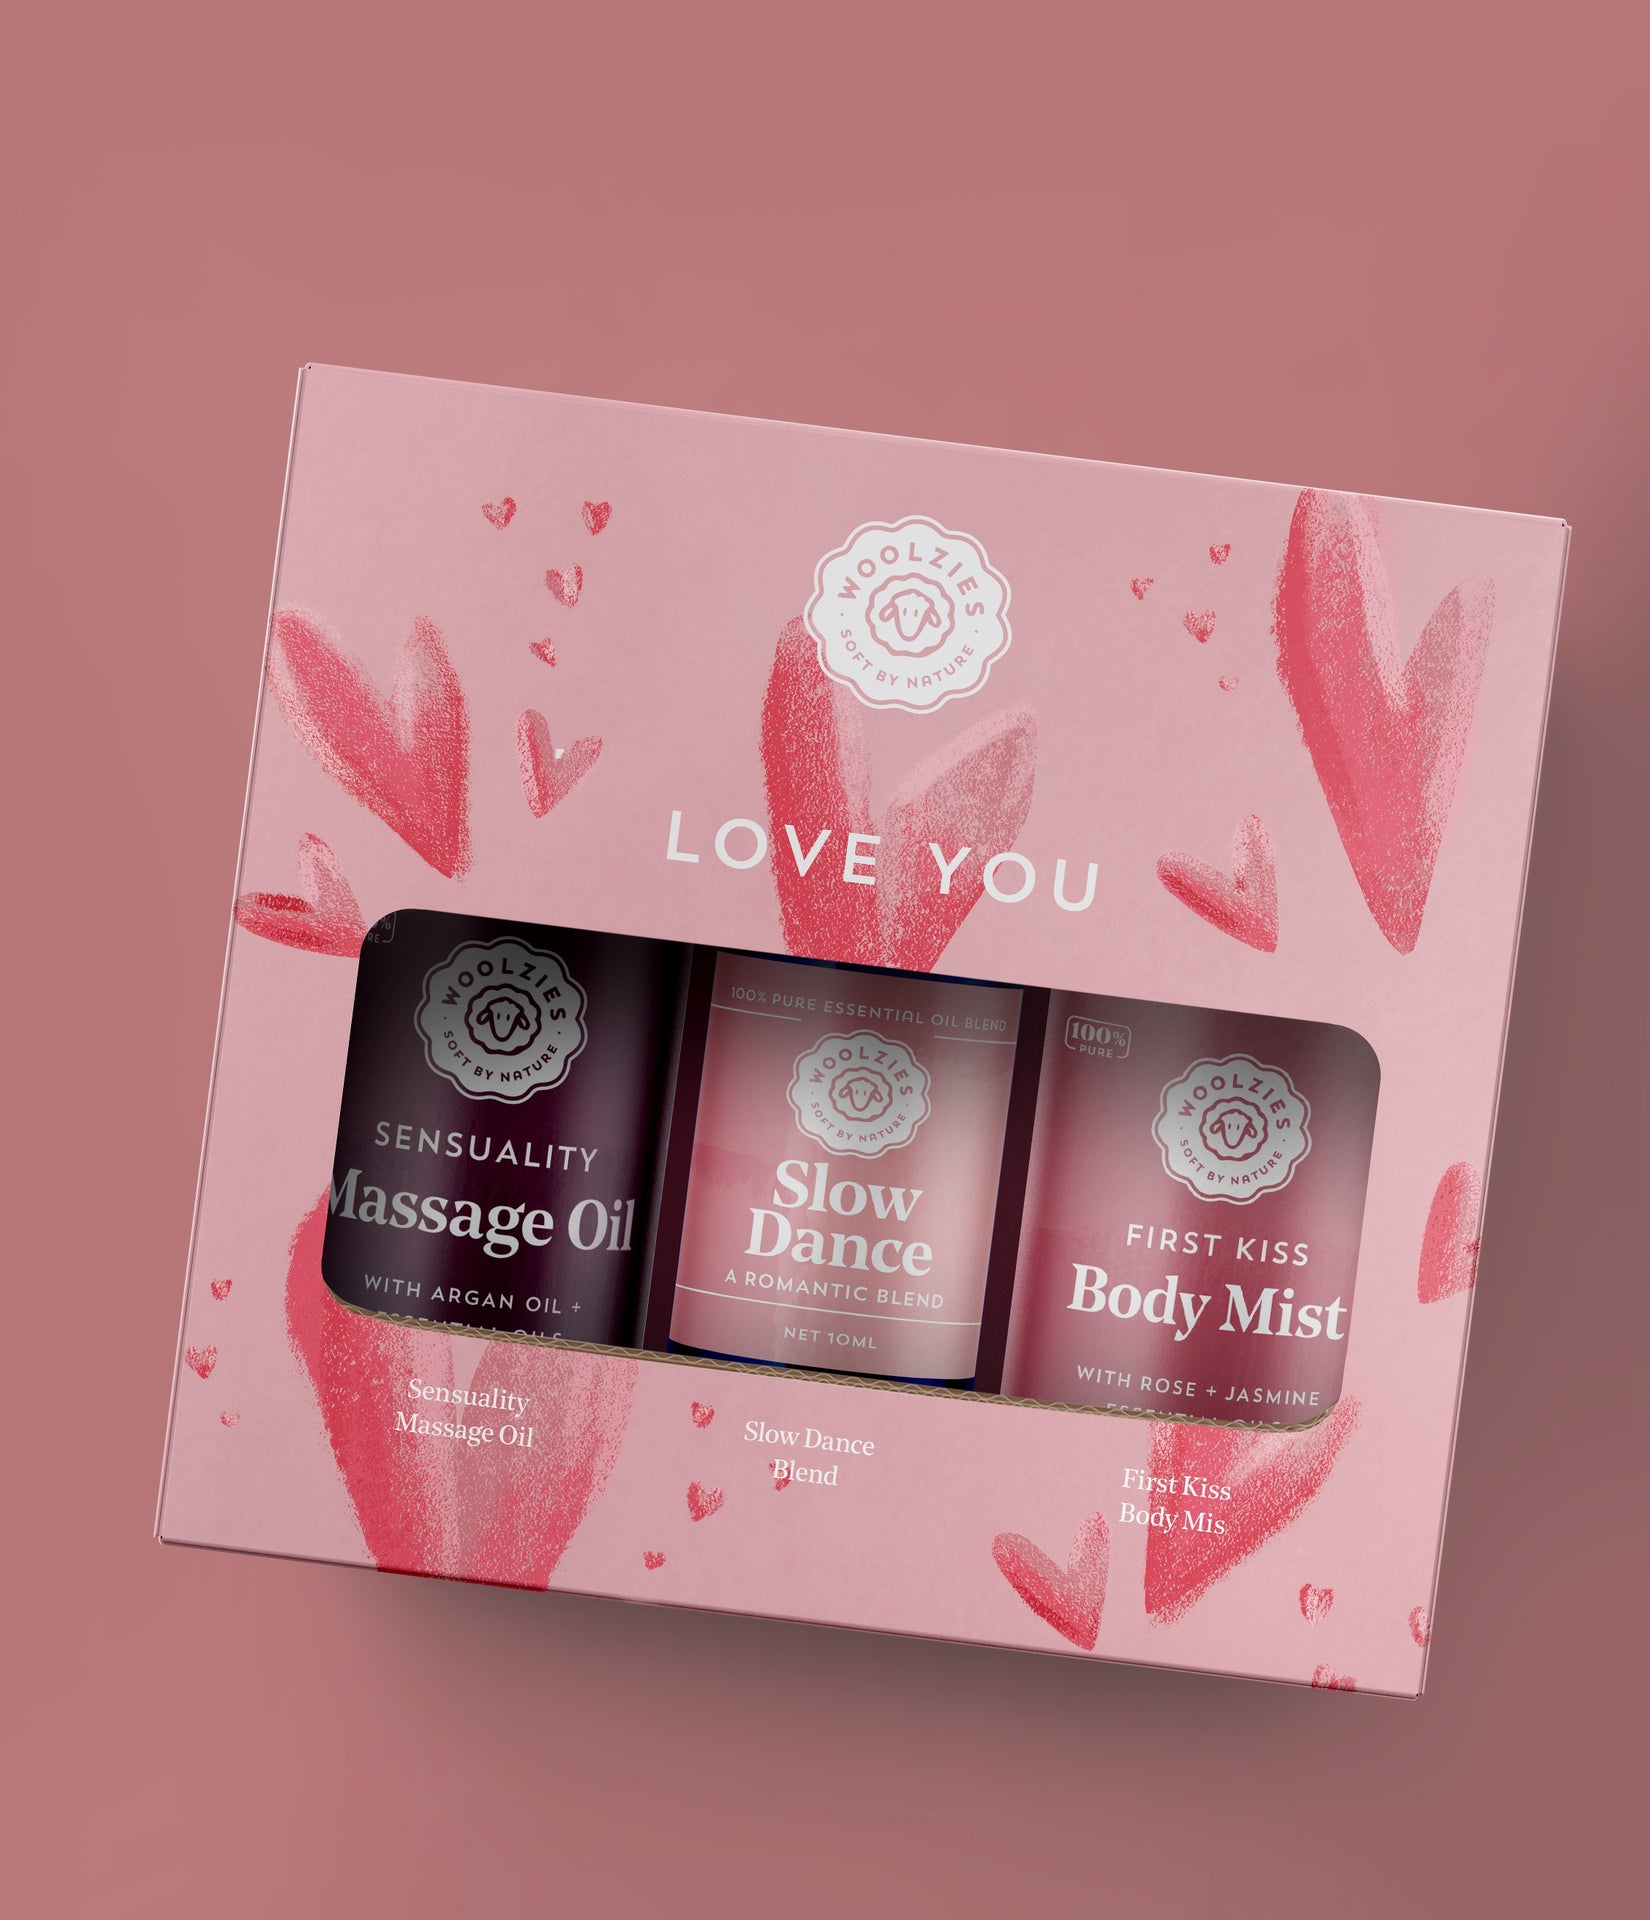 The Love You Collection